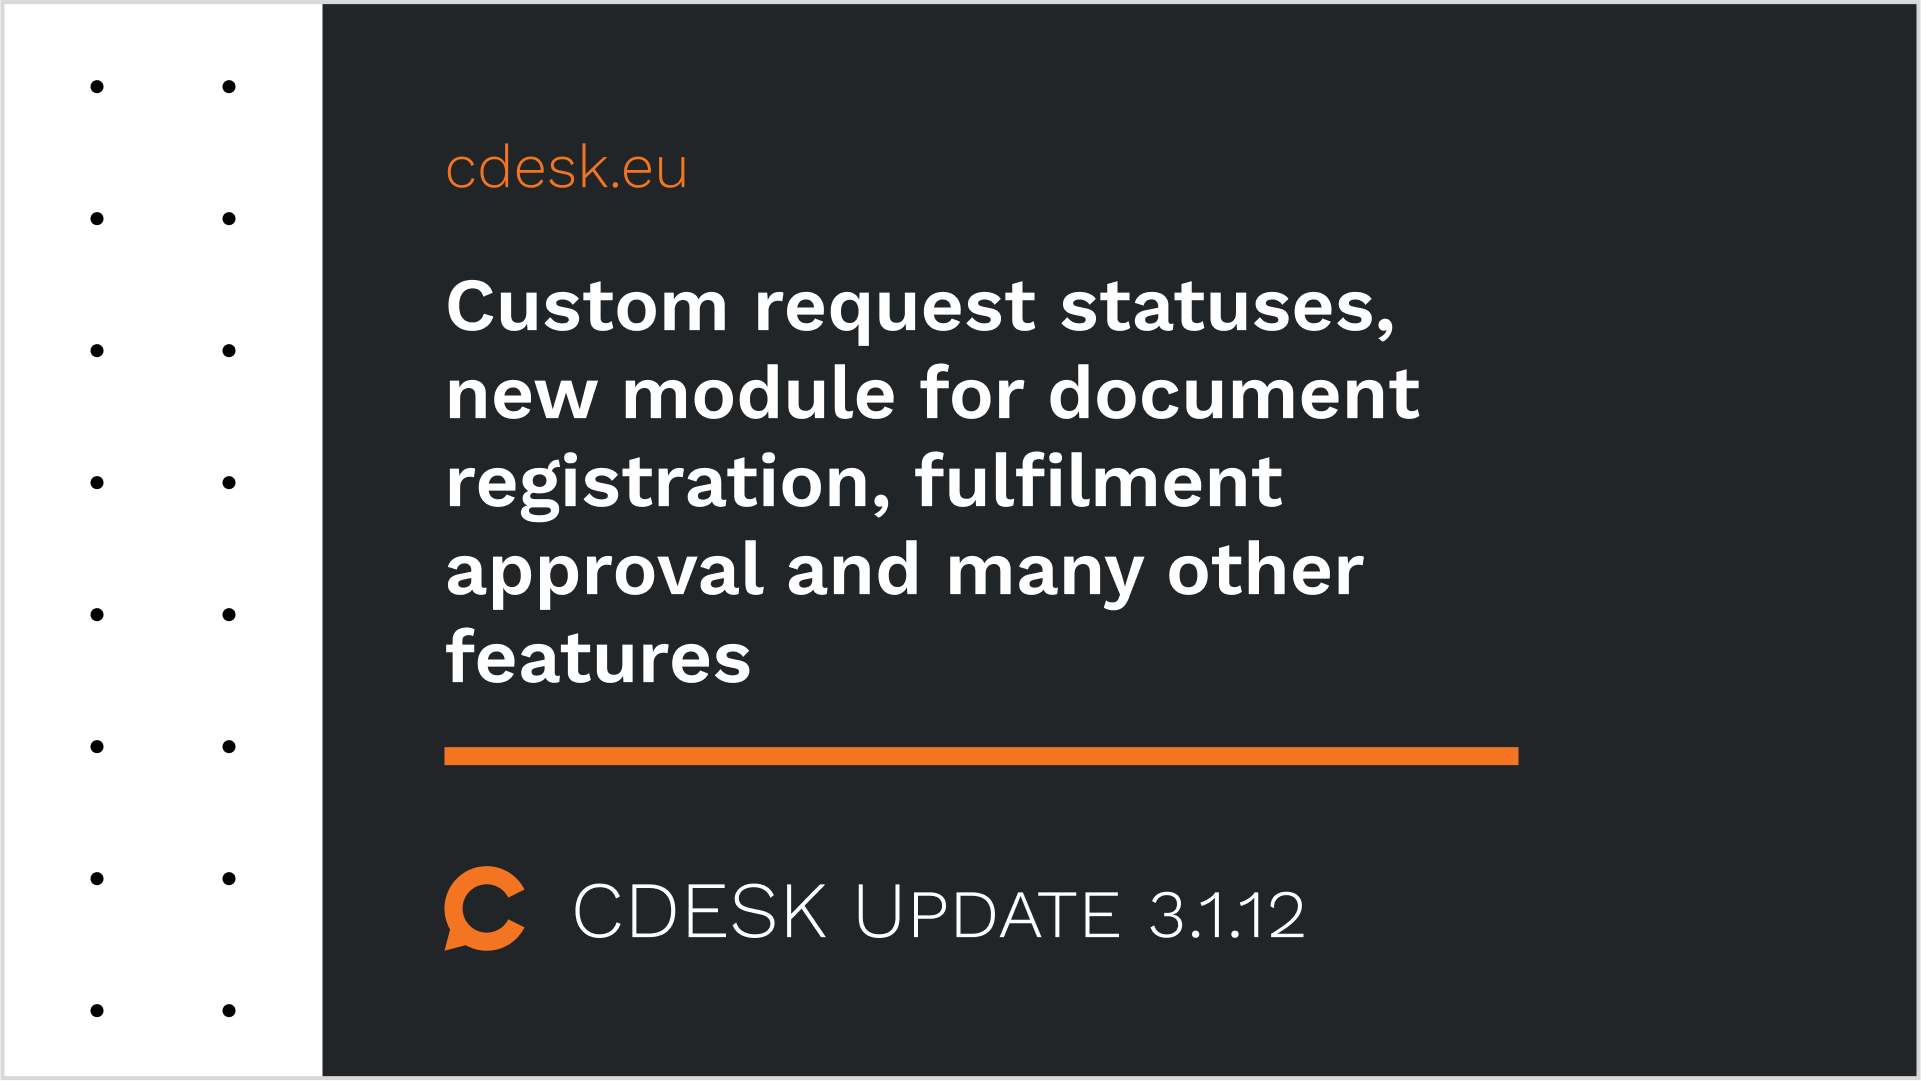 Custom request statuses, new module for document registration, fulfilment approval and many other features